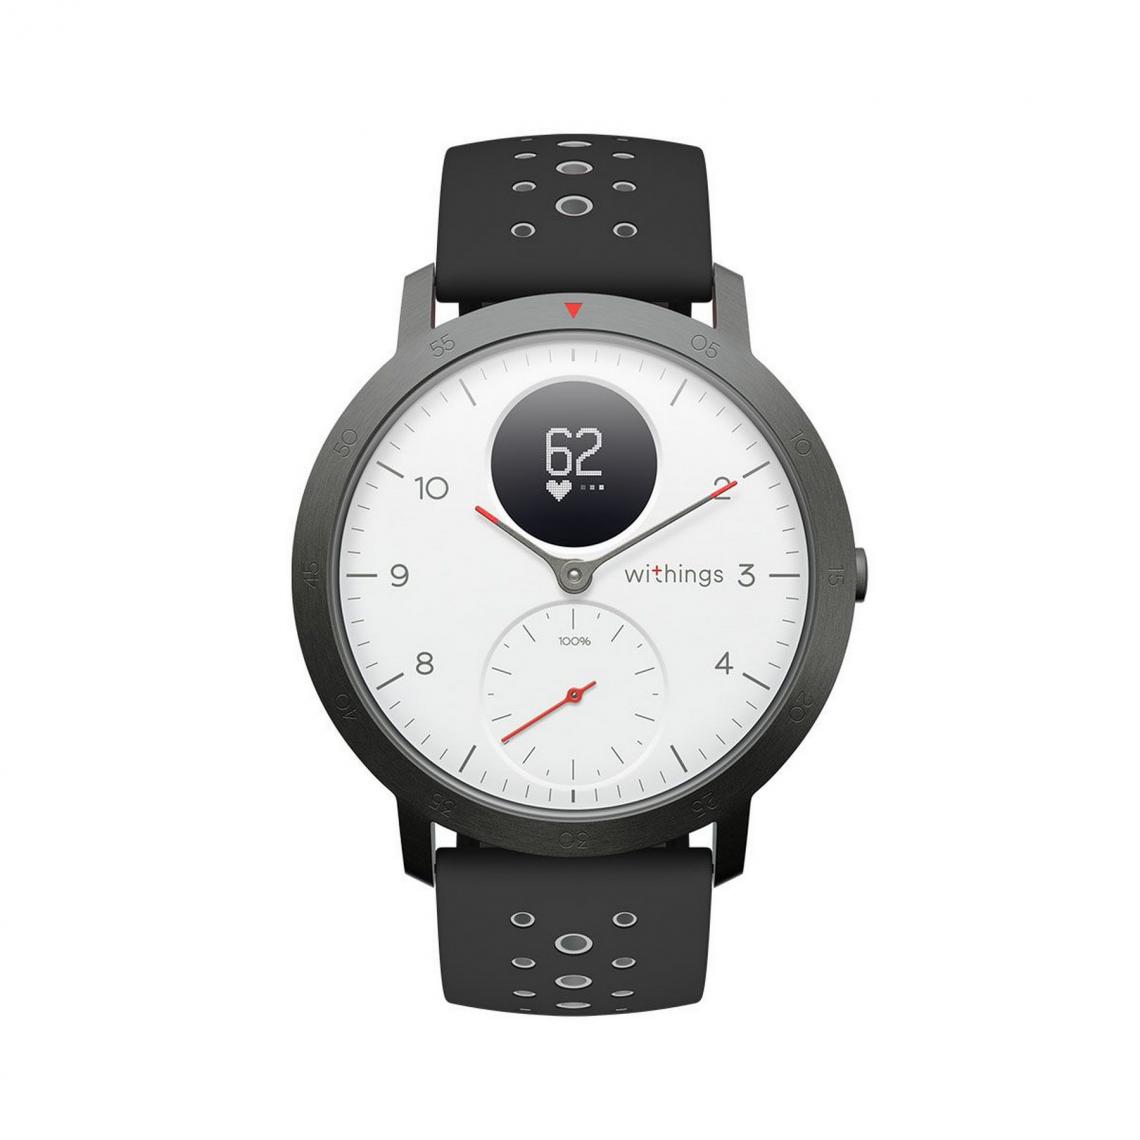 Withings - Montre connectée Homme WITHINGS Montres STEEL HR 3 Aiguilles - Induction HWA01-White-All-Inter - Bracelet Silicone Noir - Montre connectée